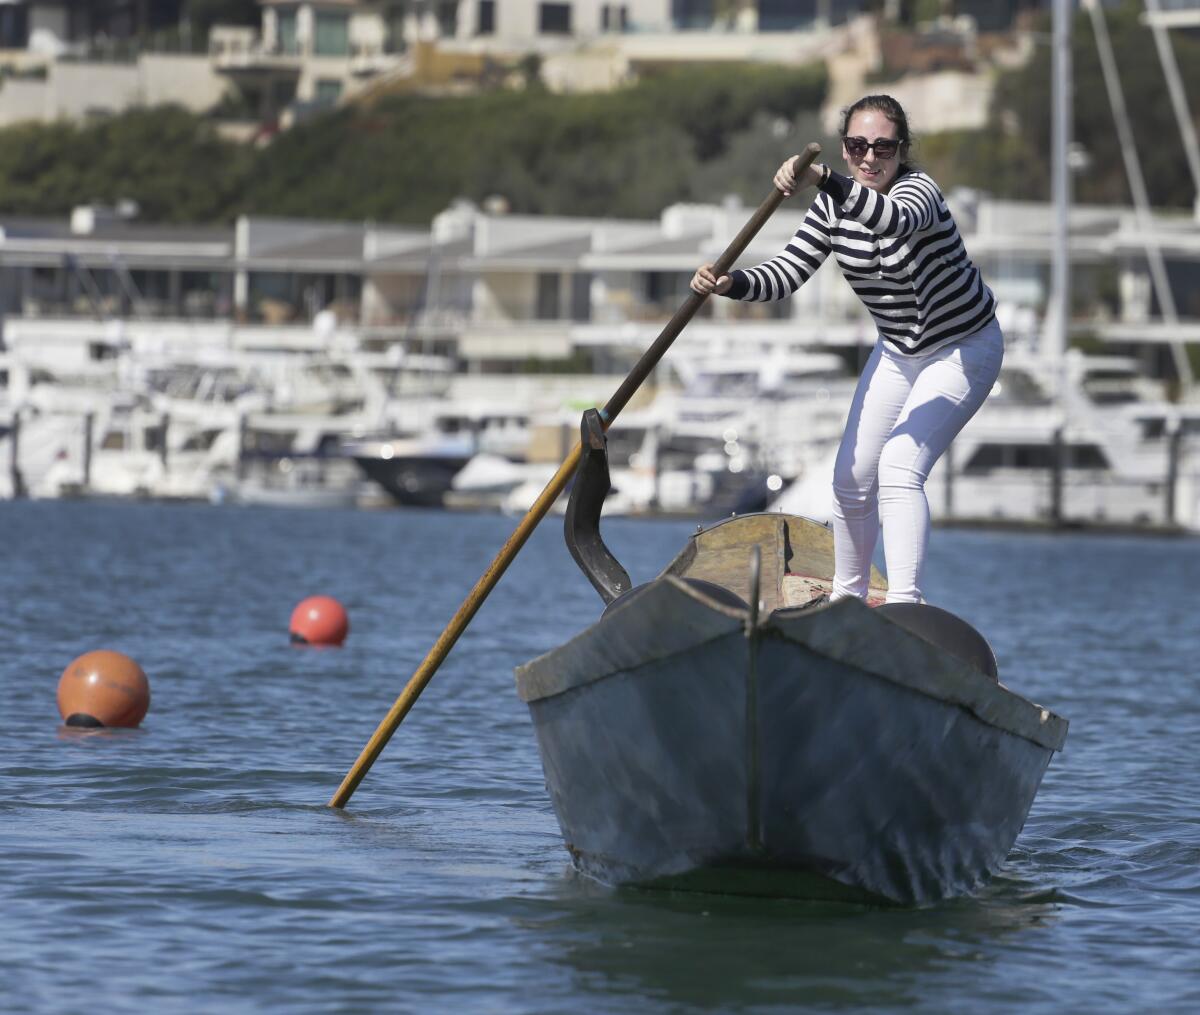 Roselyn Young maneuvers her gondola around a buoy during the solo obstacle event Saturday at the U.S. Gondola Nationals being held this weekend at the Bahia Corinthian Yacht Club in Newport Beach.